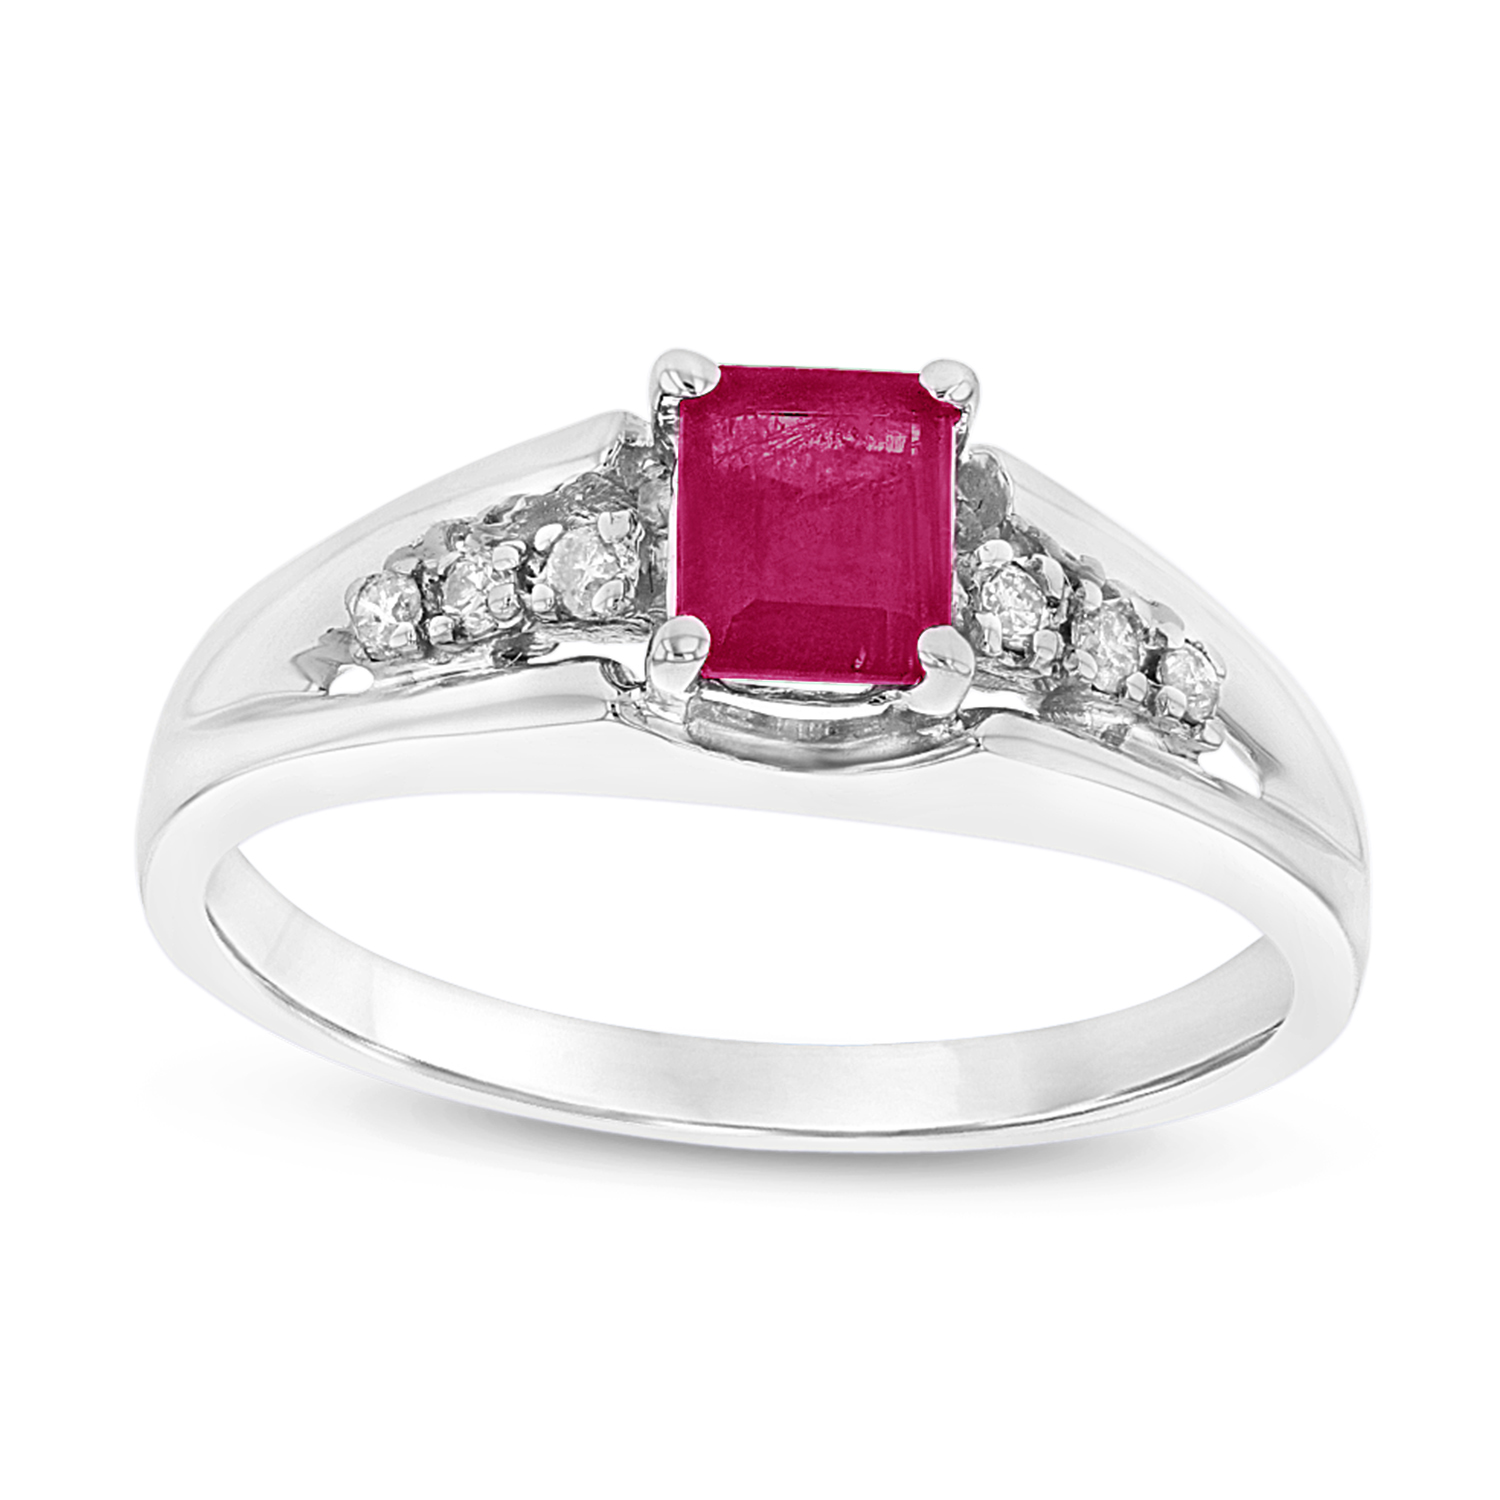 0.68cttw Natural Heated Ruby and Diamond Ring set in 14k Gold